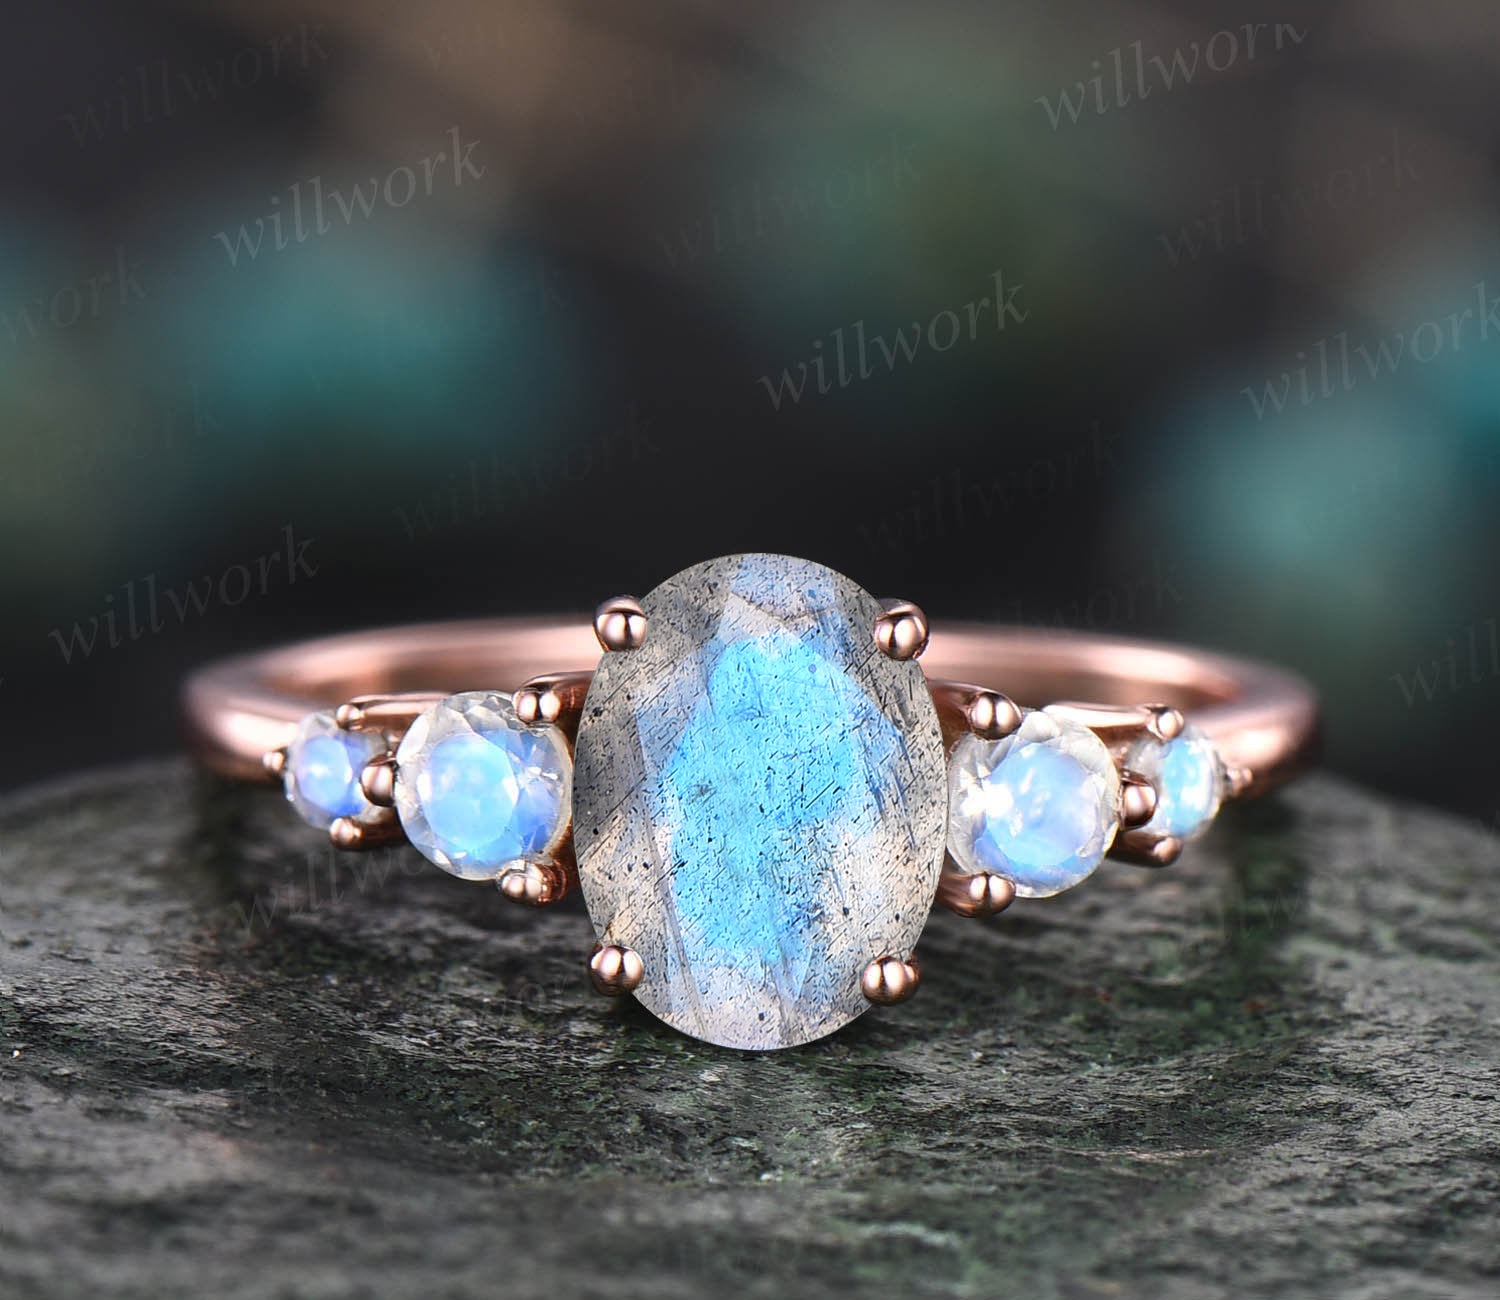 Minimalist Square Blue Stone Amazon Ring For Women Elegant Pinky Accessory  For Engagement And Jewelry From Andyandalanshop, $6.23 | DHgate.Com